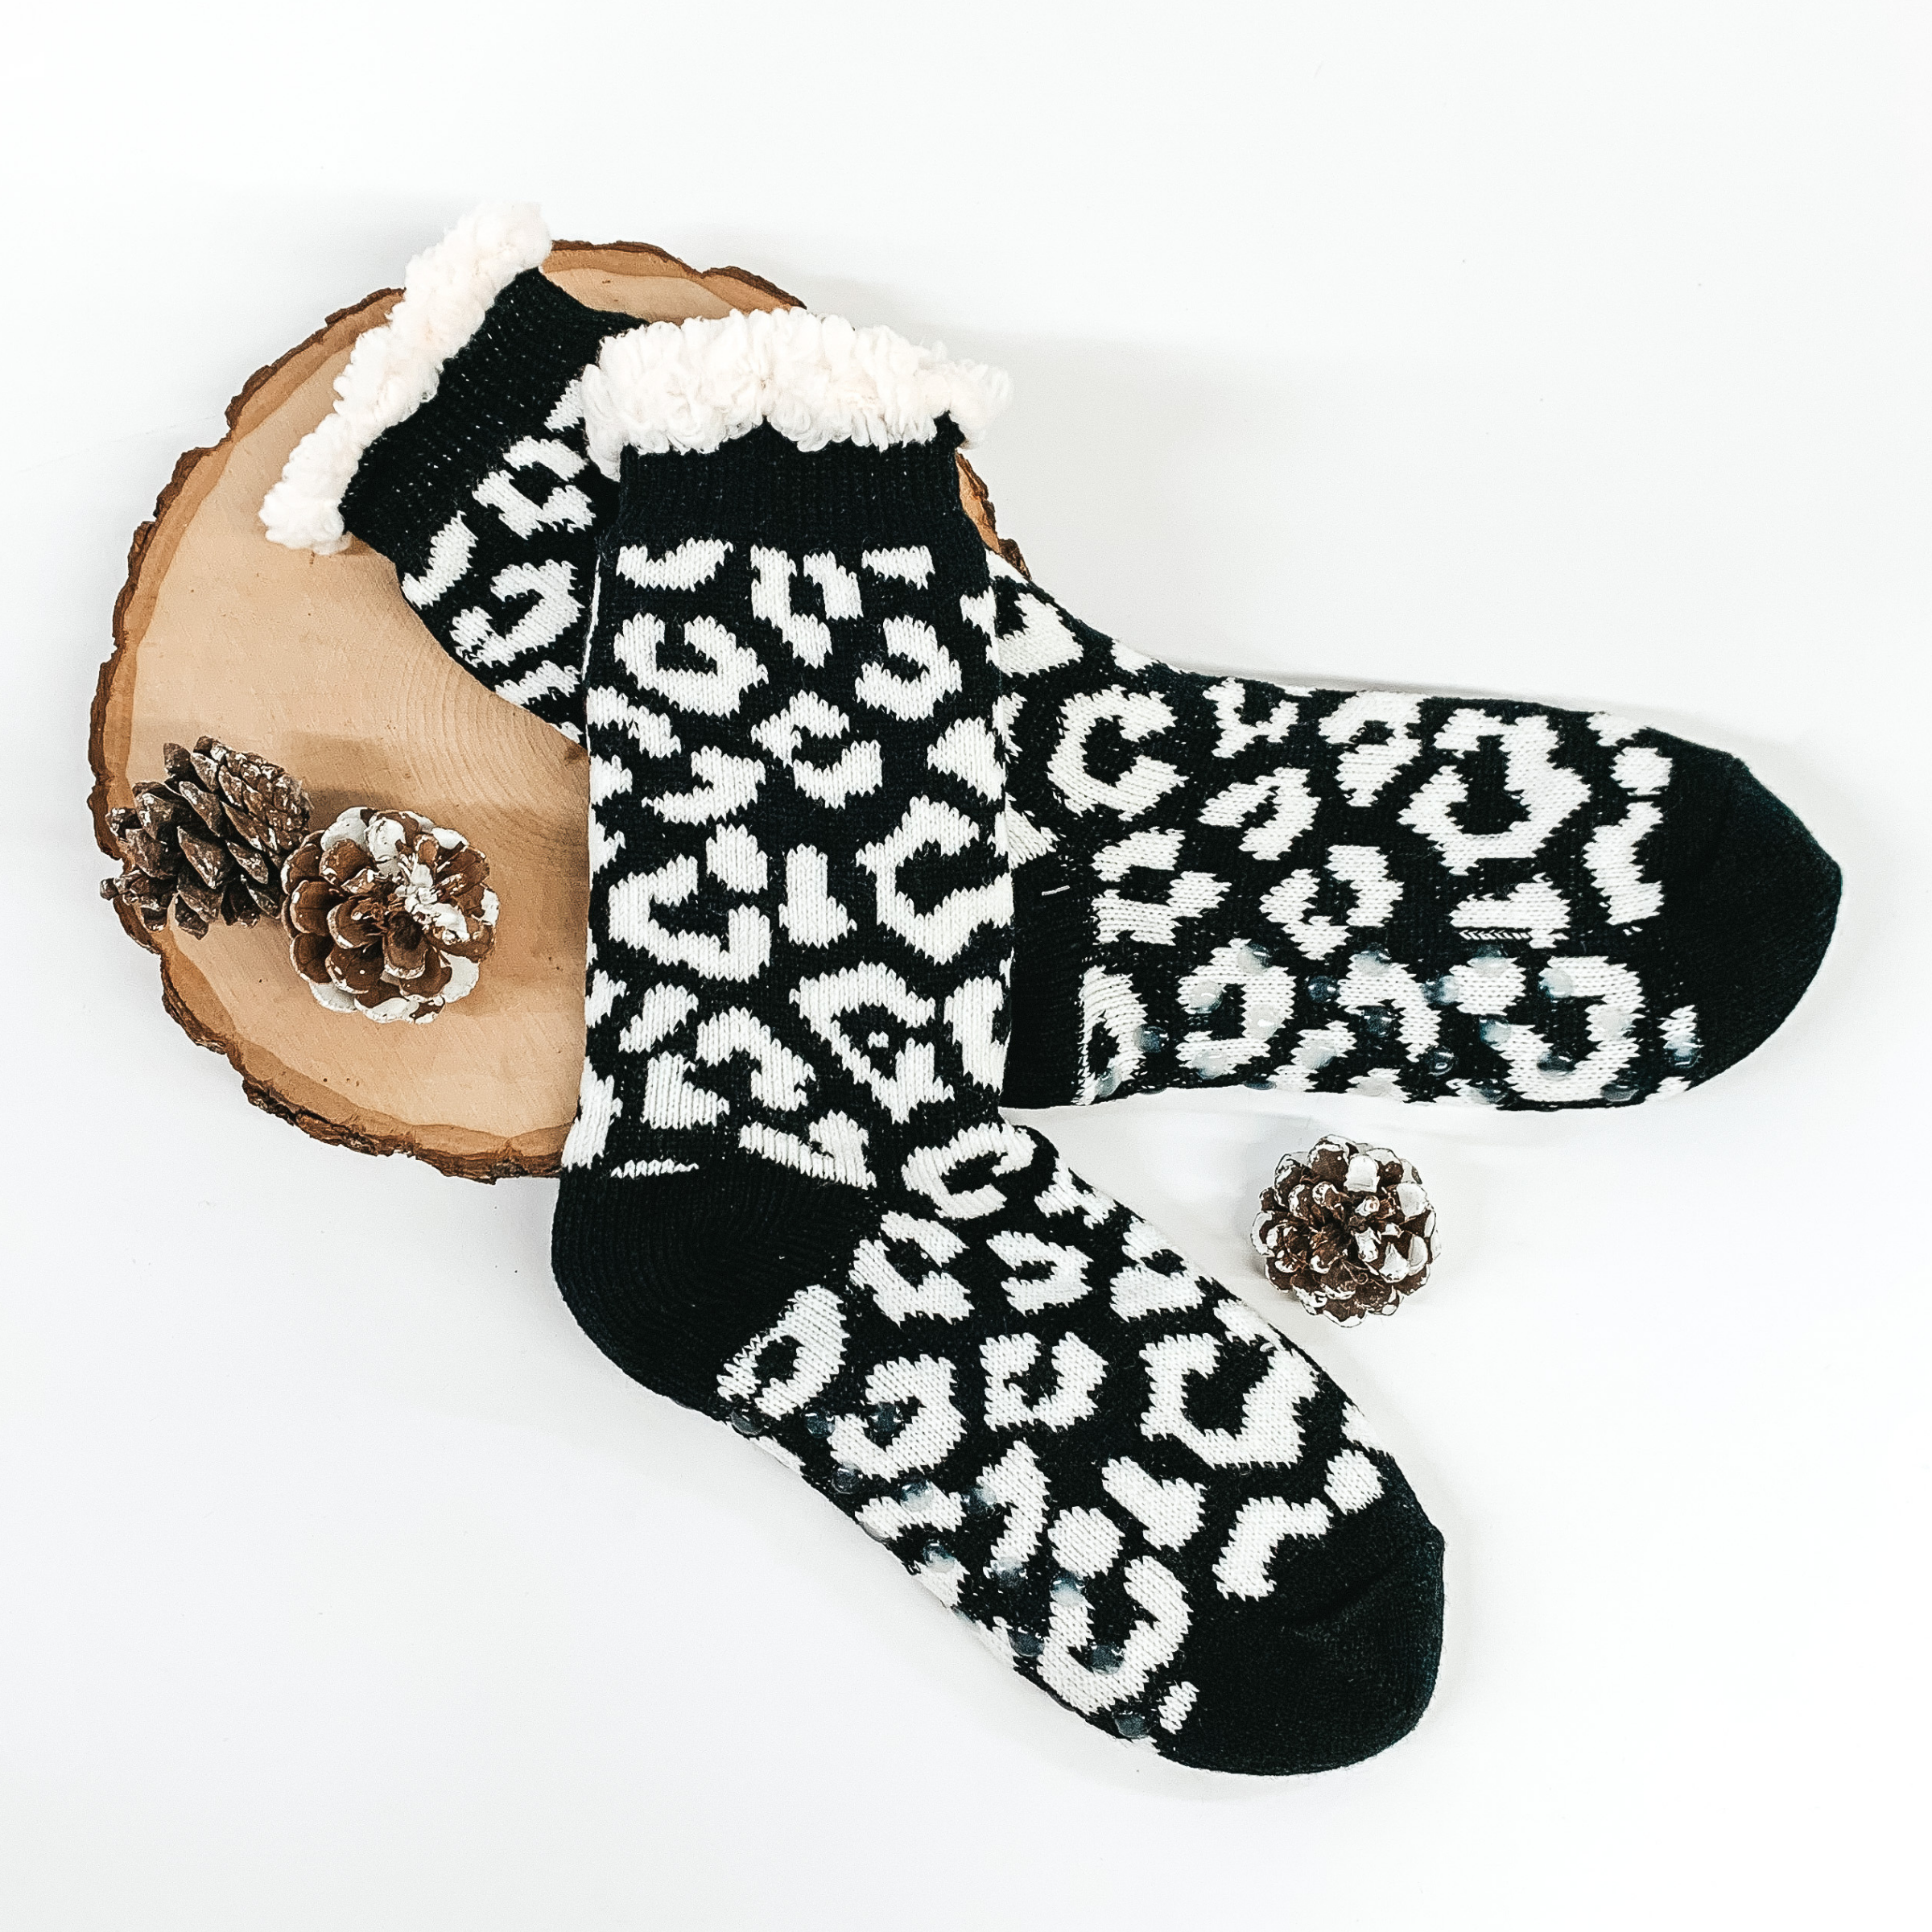 Black socks with white leopard spots. The socks has white sherpa at the top of the socks. The socks are pictured on a white background laying on a piece of wood with a few pine cones.